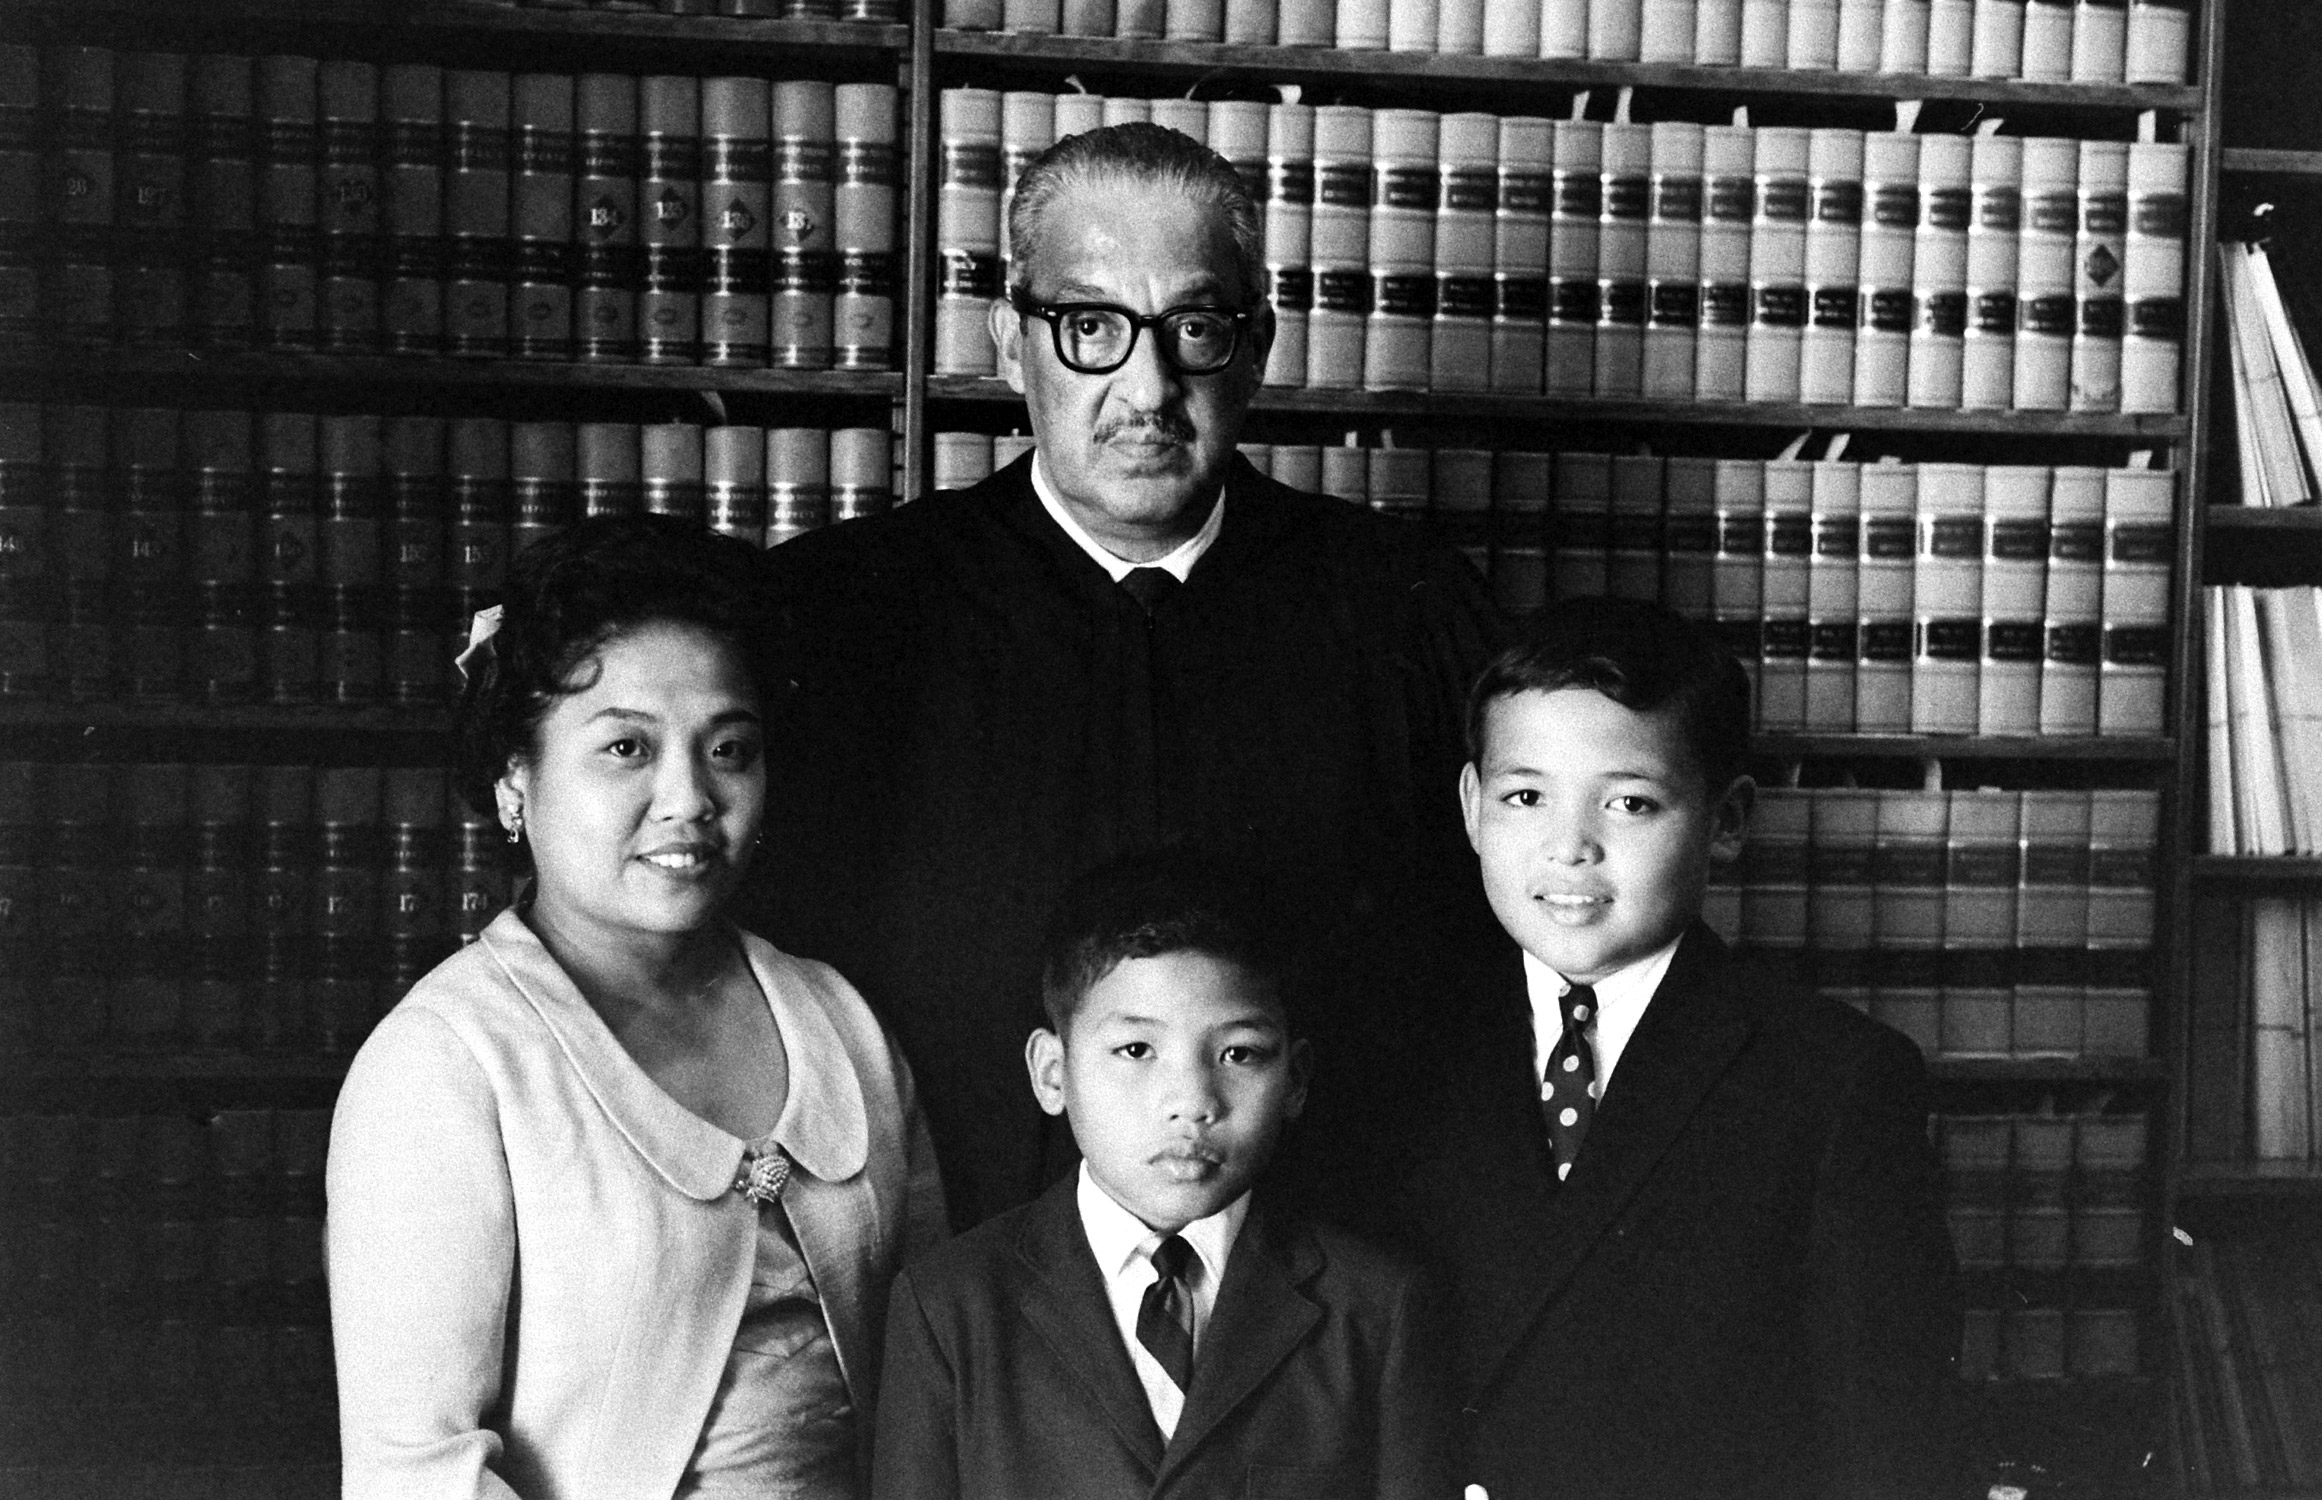 U.S. Justice Thurgood Marshall with his wife and children, 1967.